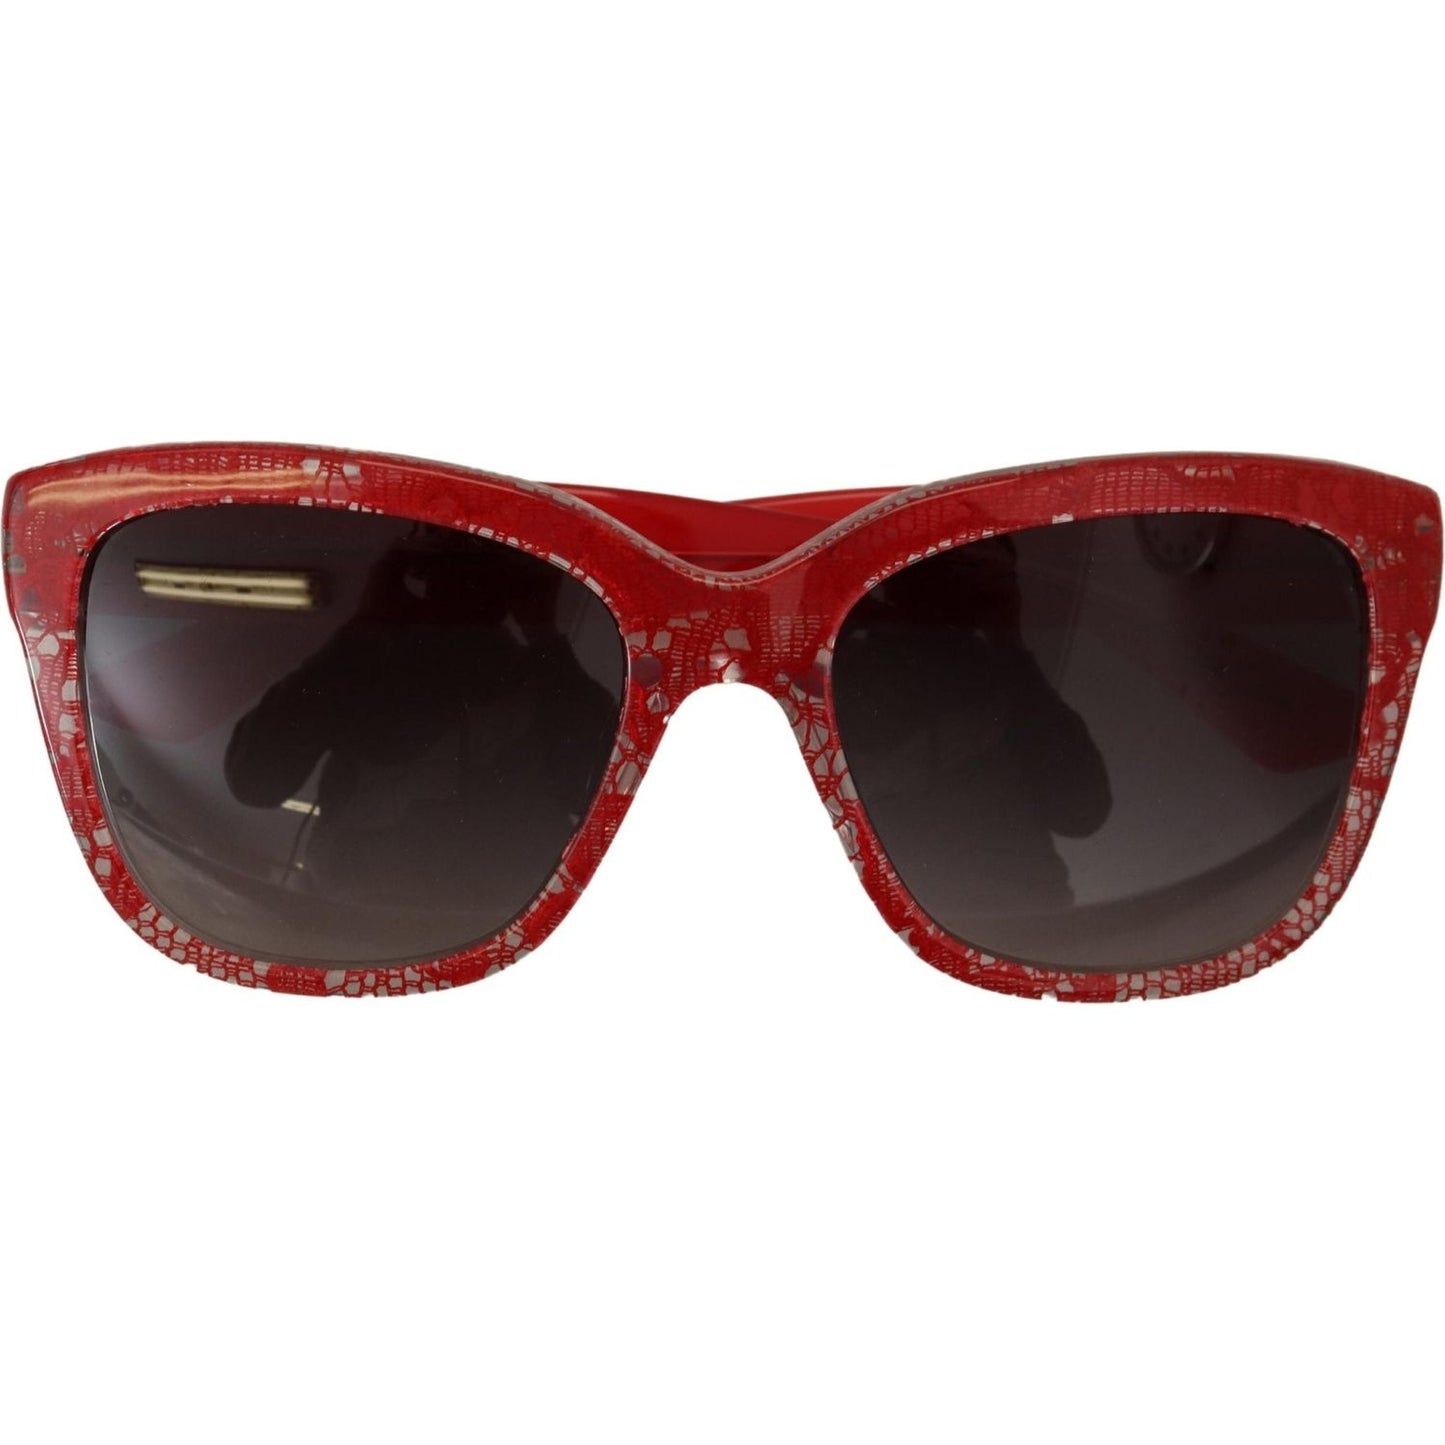 Dolce & Gabbana Elegant Red Lace-Insert Sunglasses red-lace-acetate-rectangle-shades-dg4226f-sunglasses